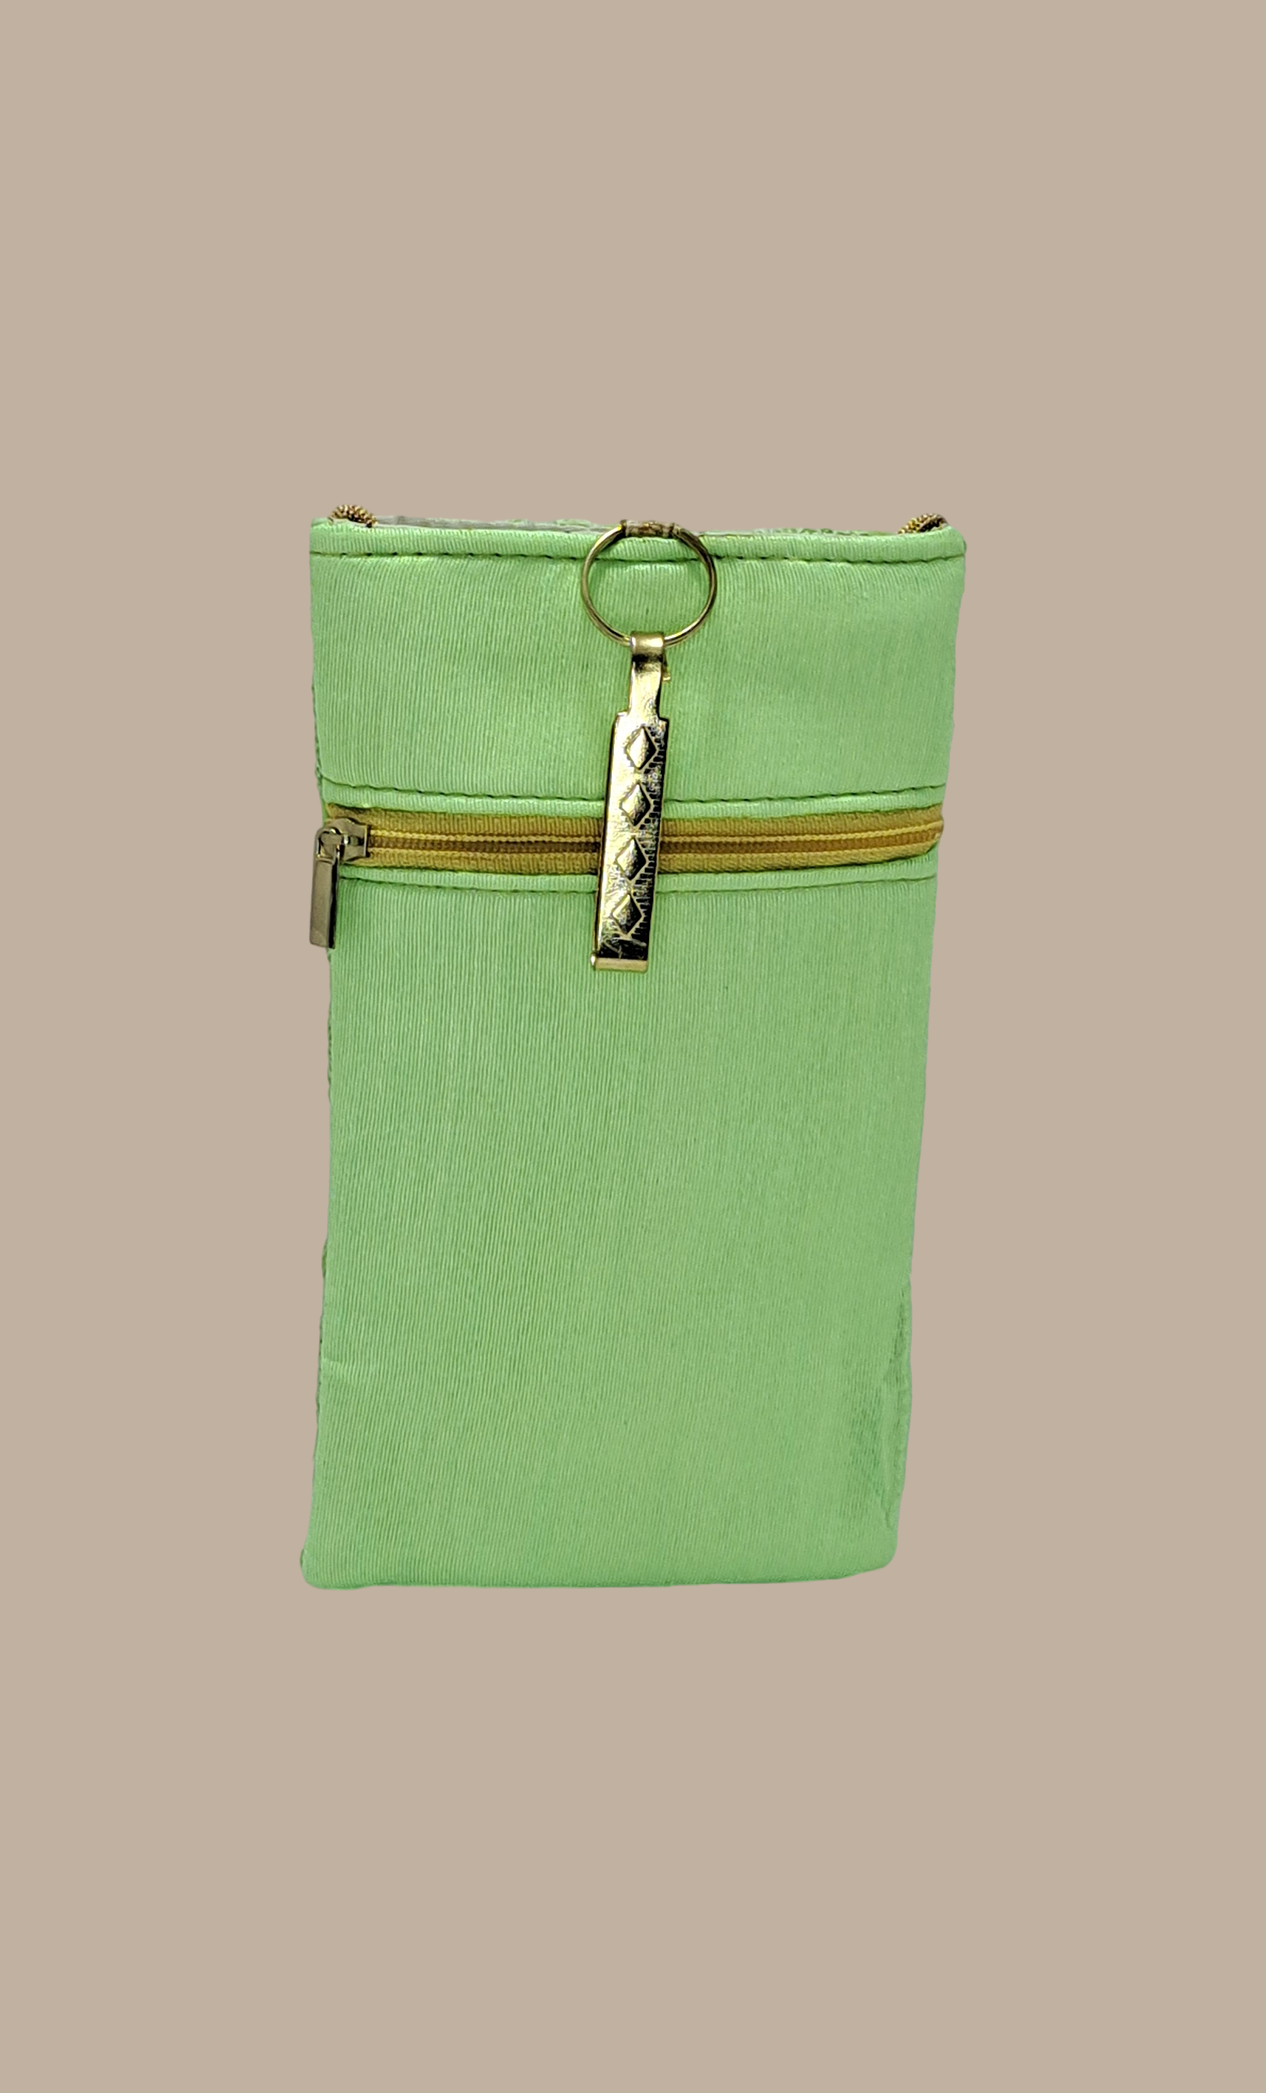 Light Lime Green Cell Phone Pouch Bag